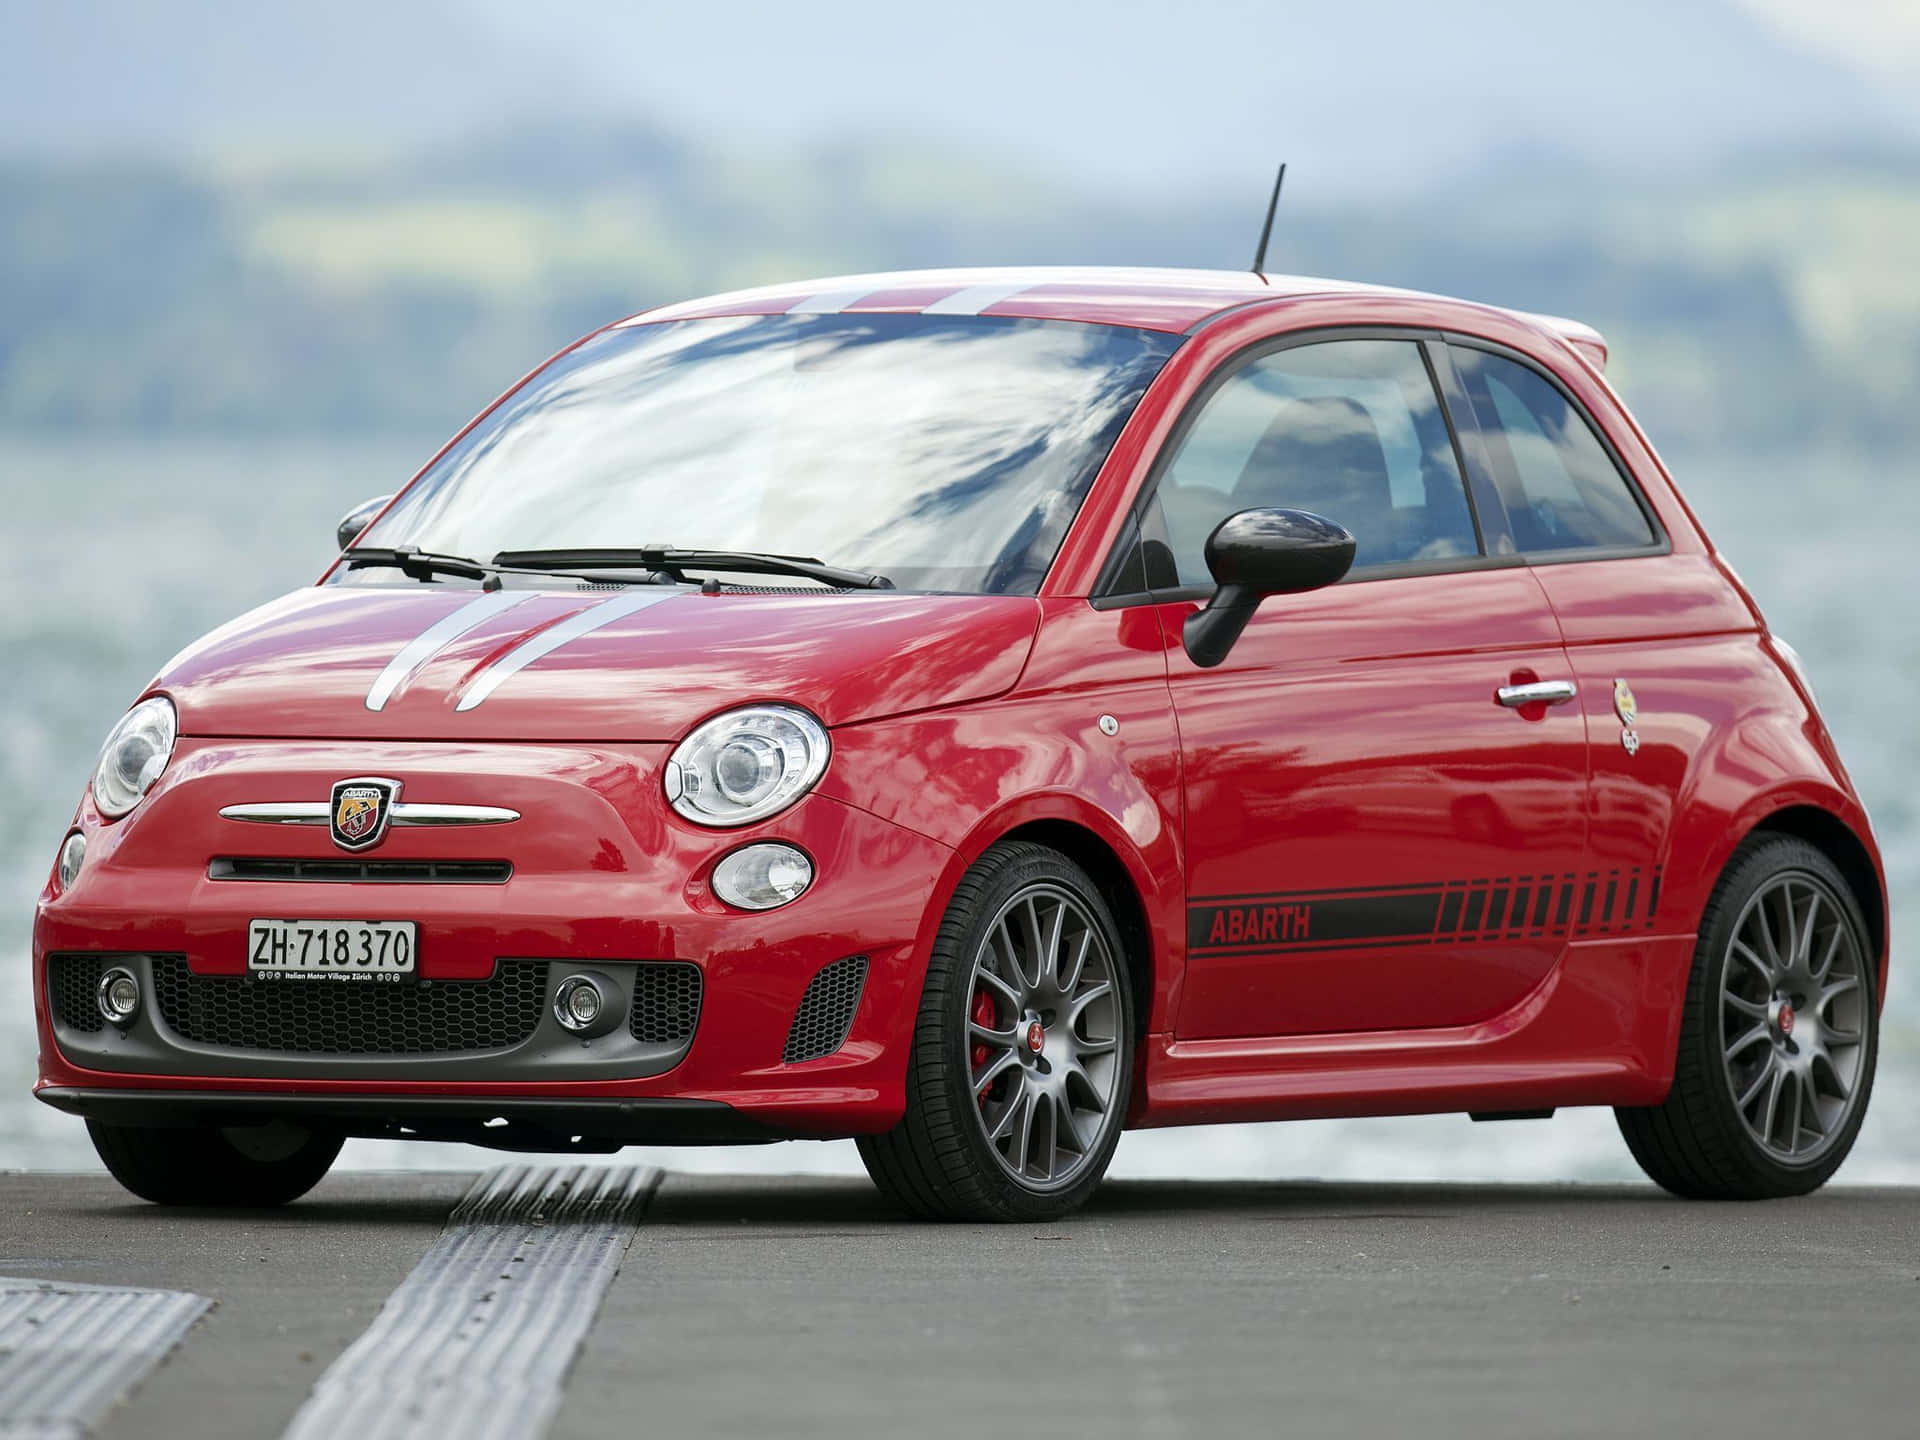 Powerful Abarth 695 Racing On The Road Wallpaper